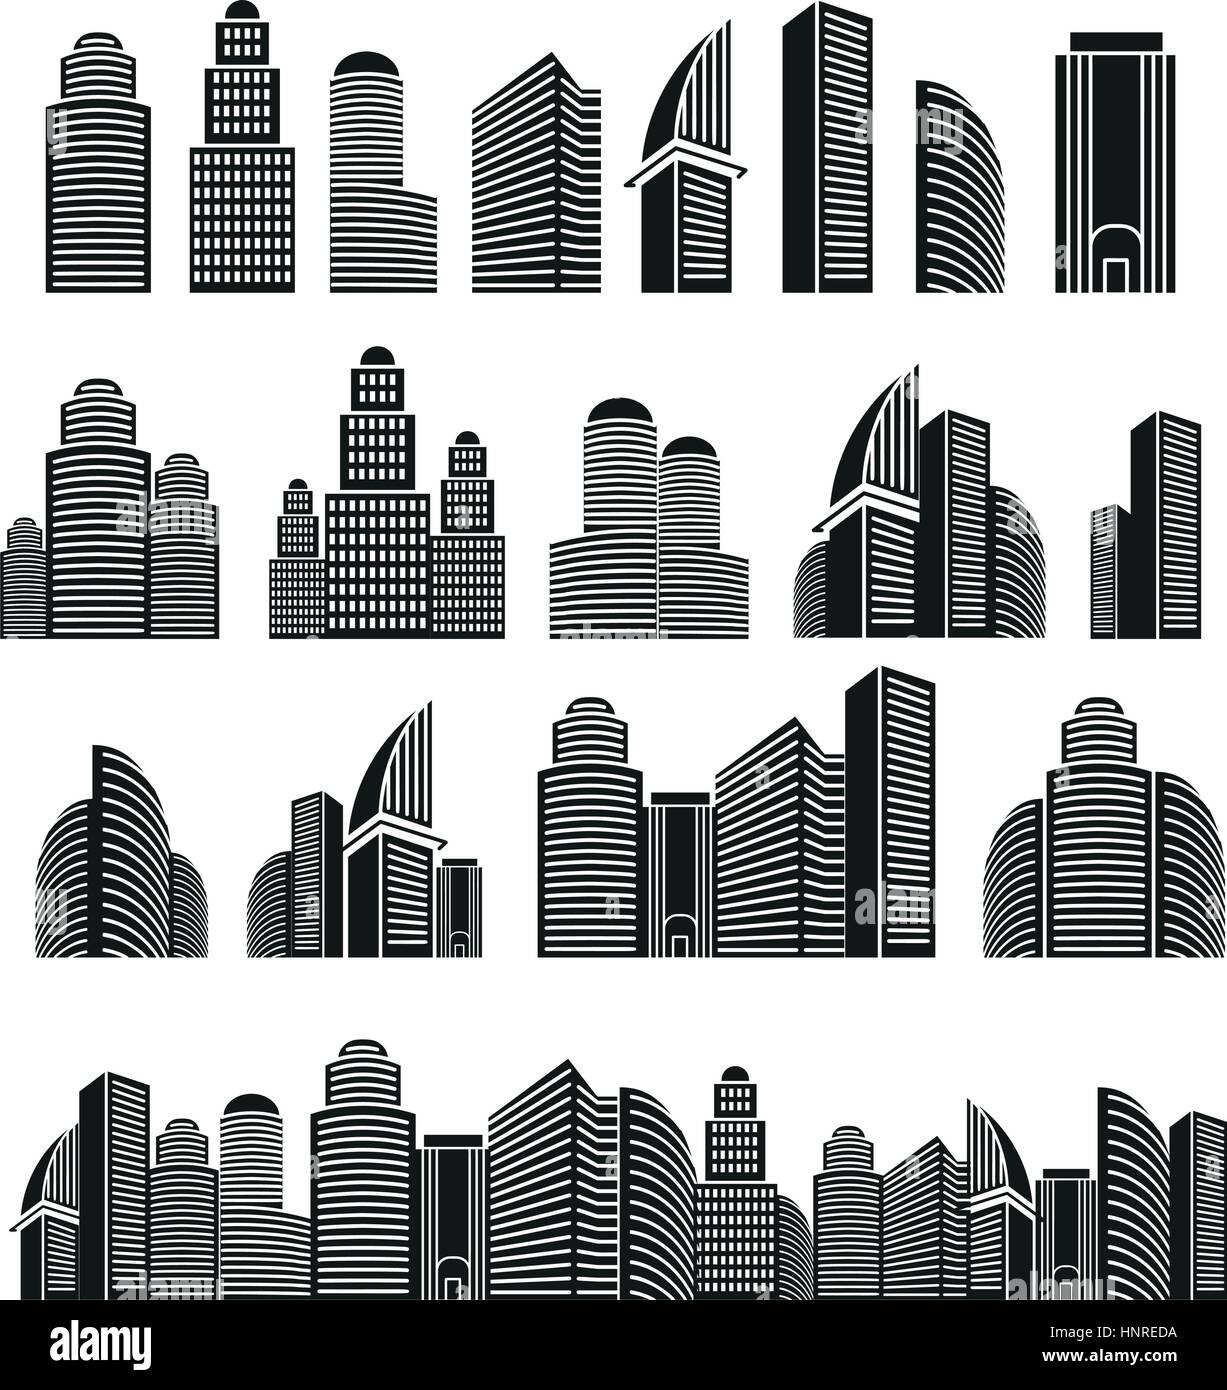 Isolated black and white color skyscrapers in lineart style icons collection, cityscape of architectural buildings vector illustrations set. Stock Vector